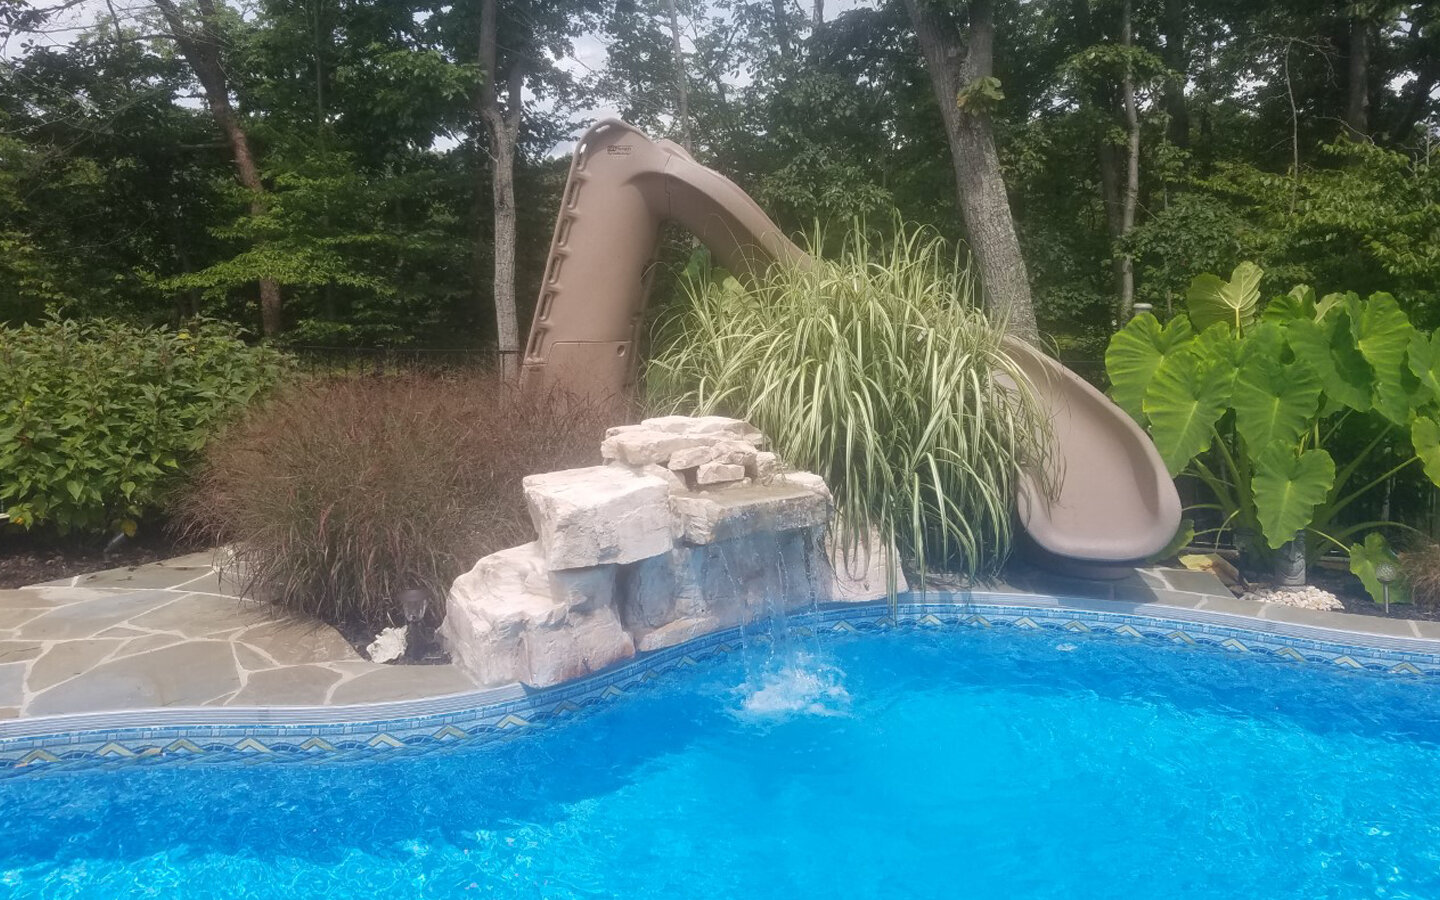  Featuring a decorative, family friendly slide and an artificial stone waterfall. 